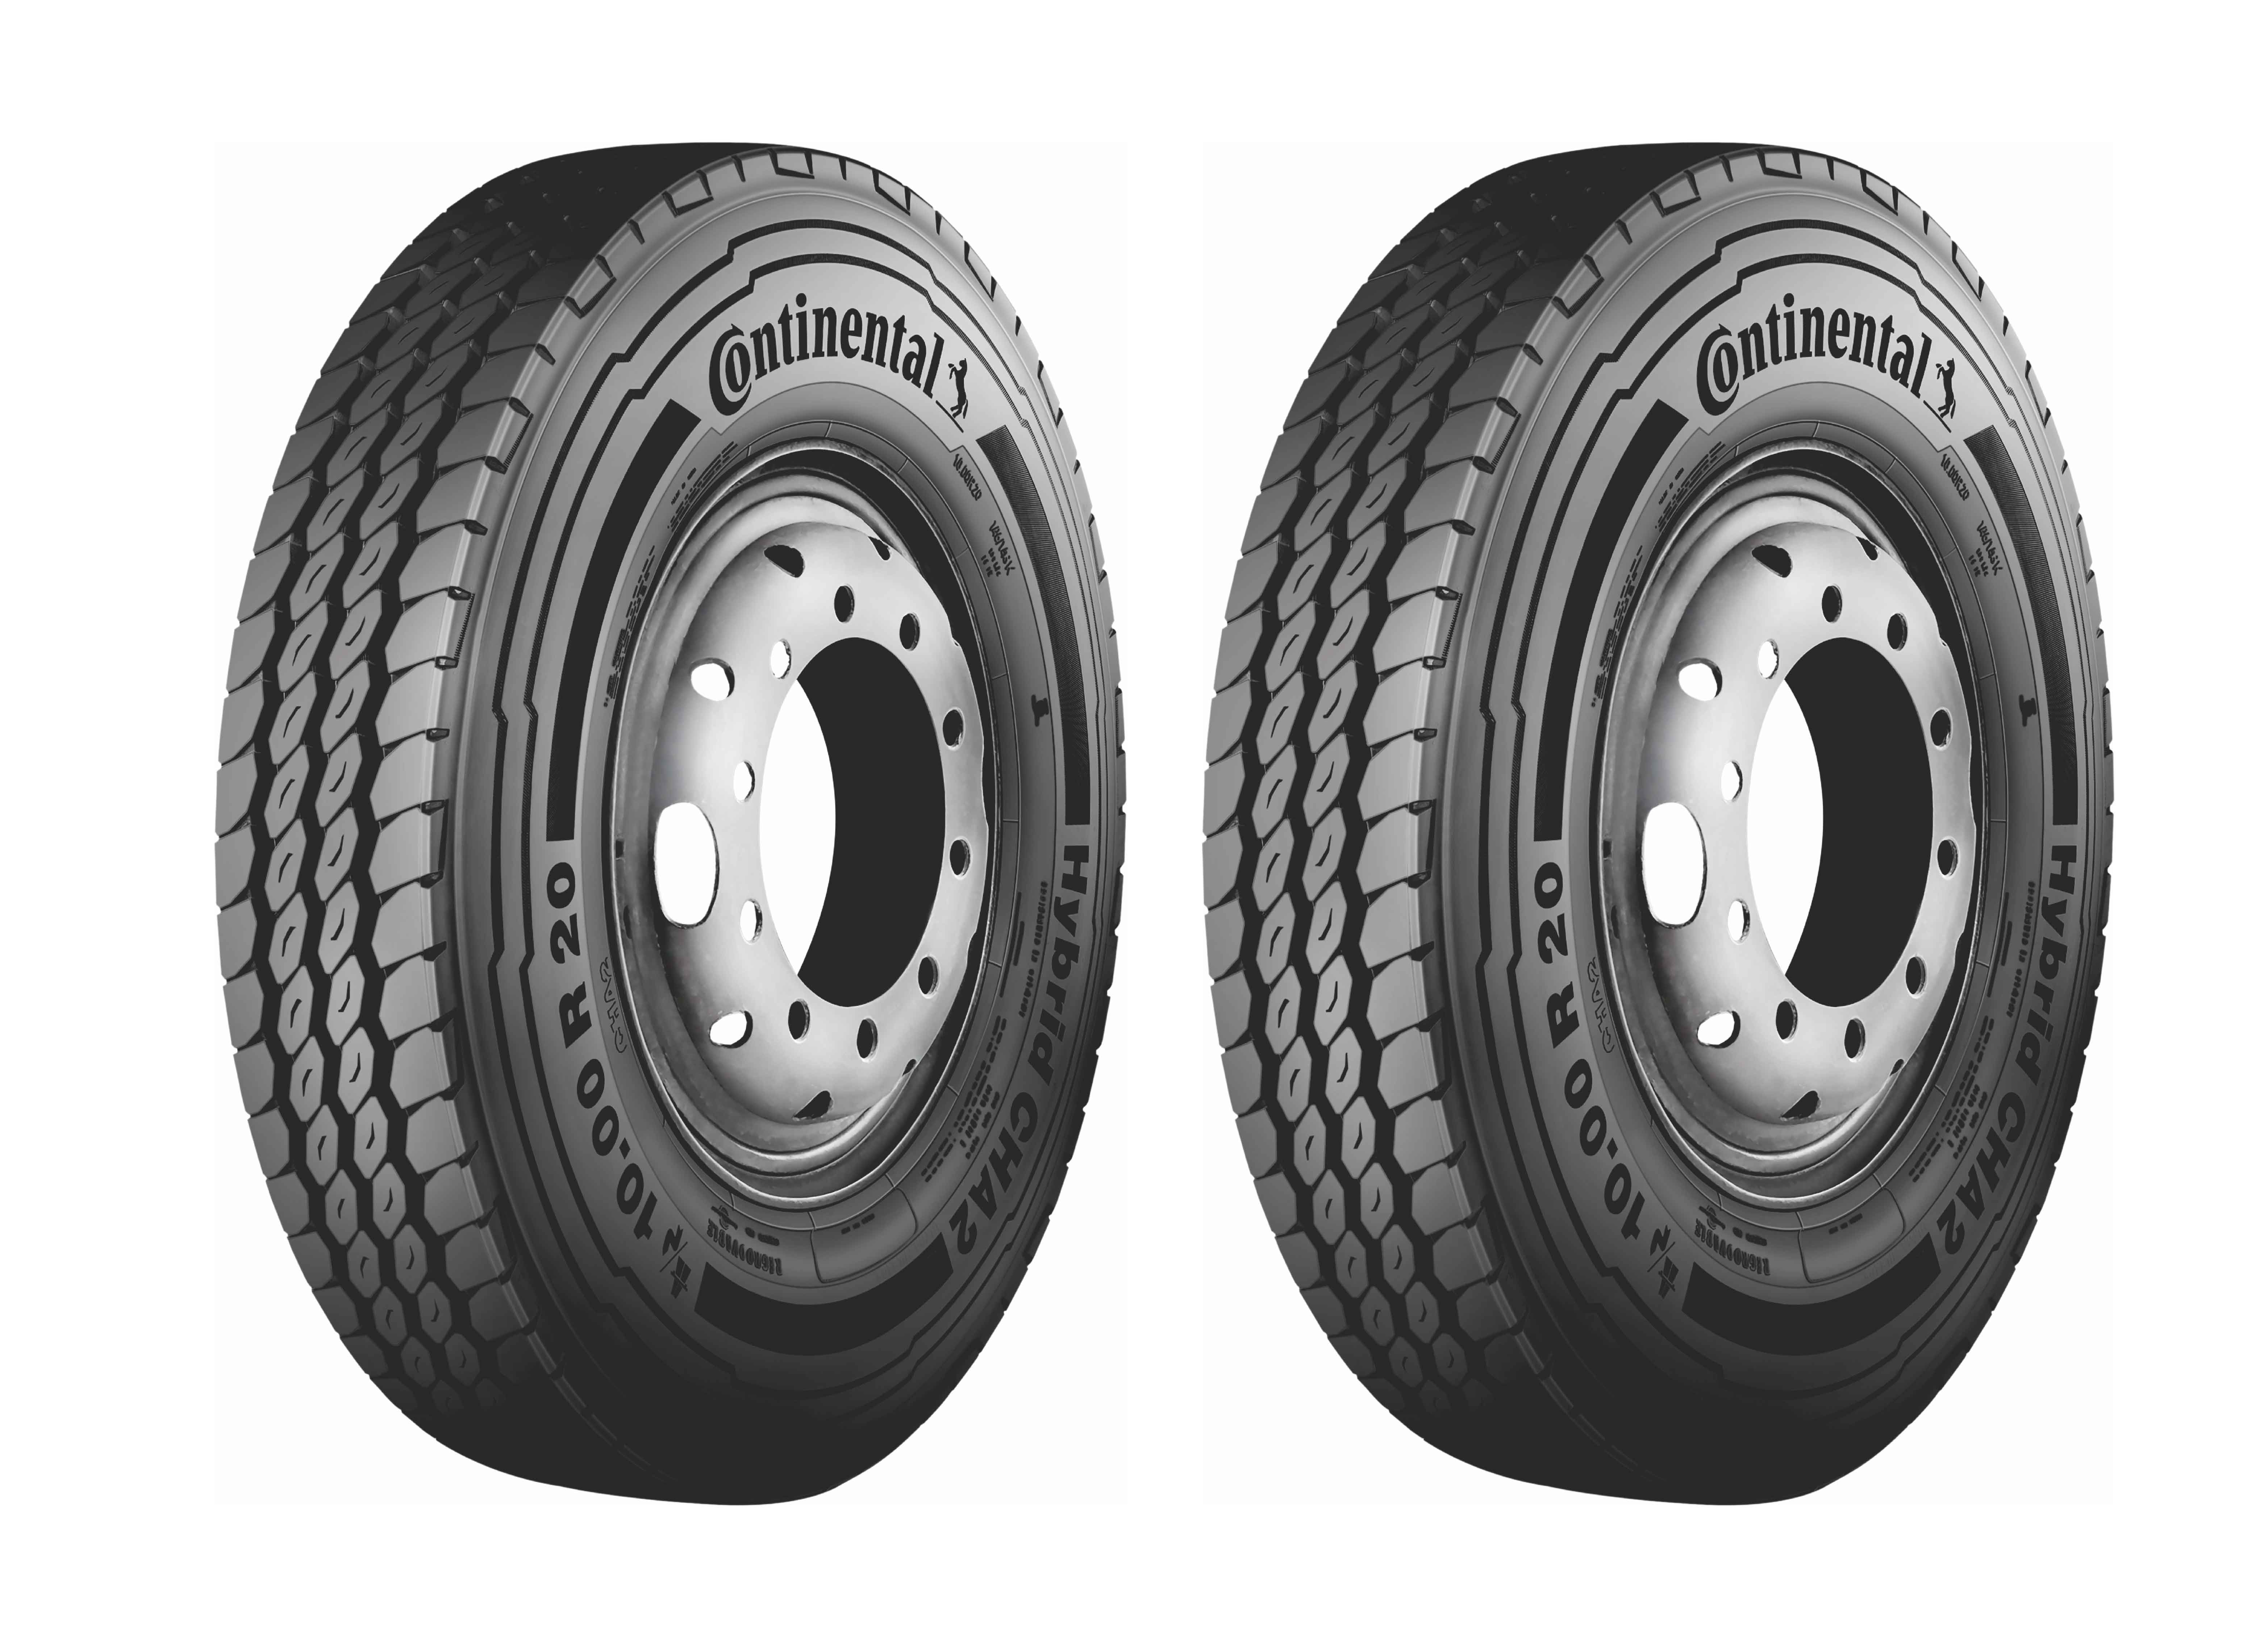 Continental’s All-Wheel 10.00R20 HYBRID CHA2 Commercial Vehicles Tires Introduced in India